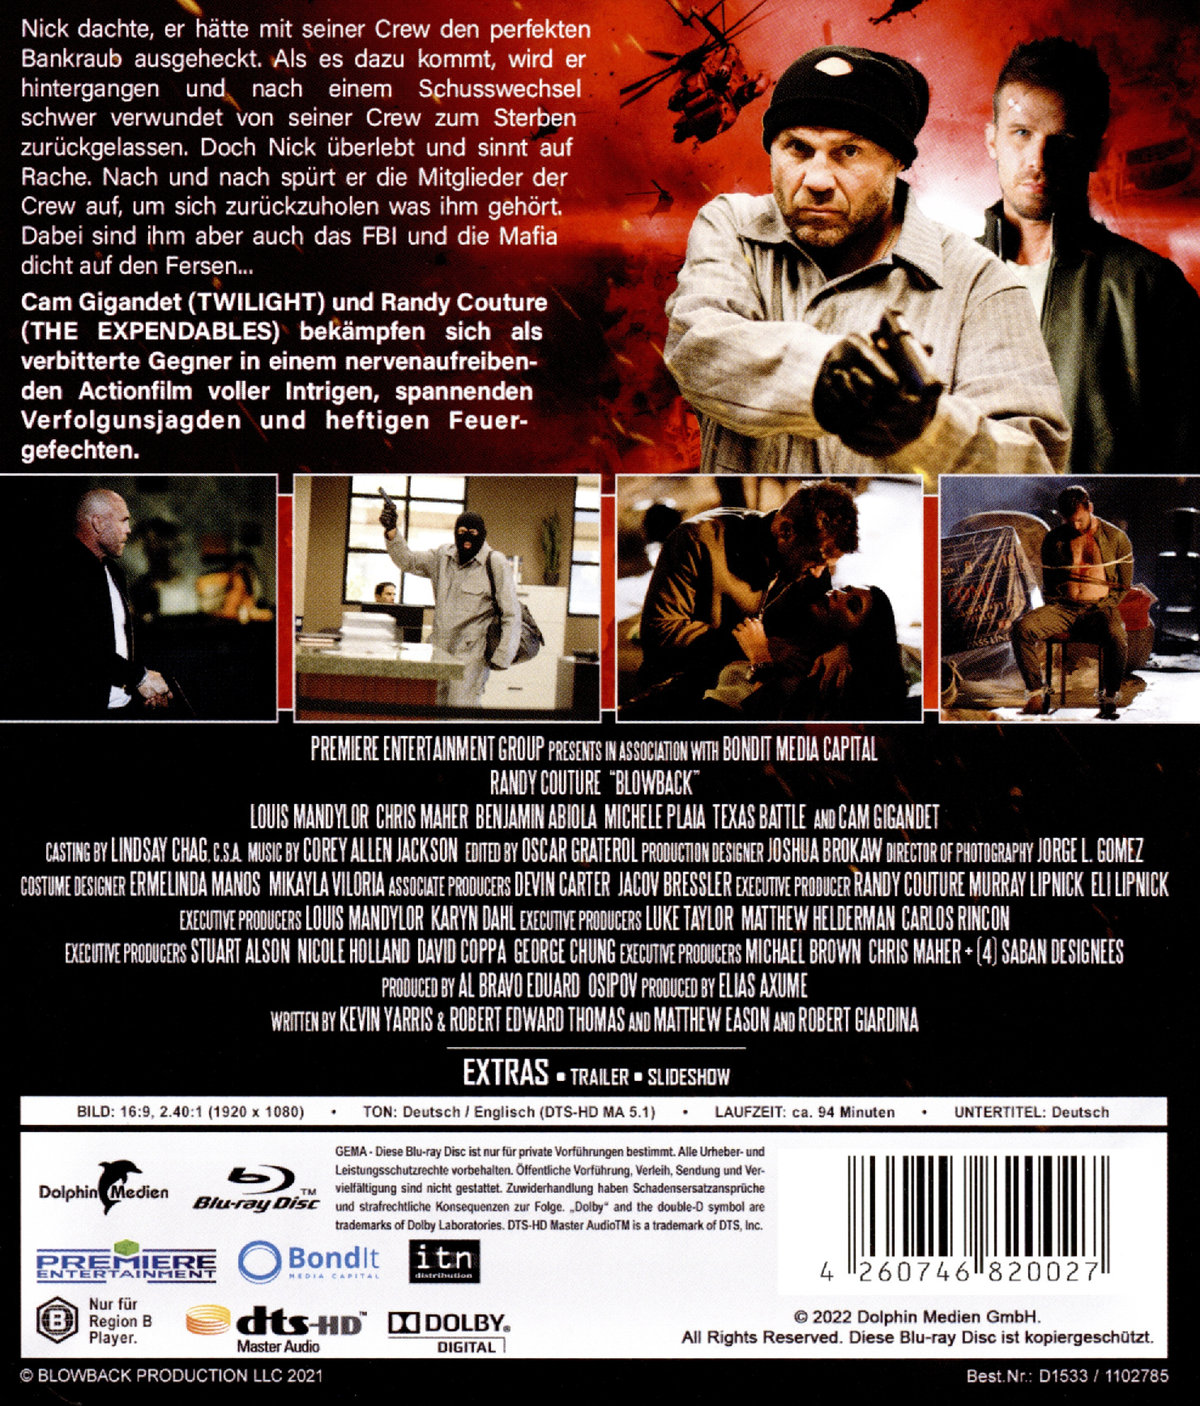 Blowback - Time for Payback (blu-ray)